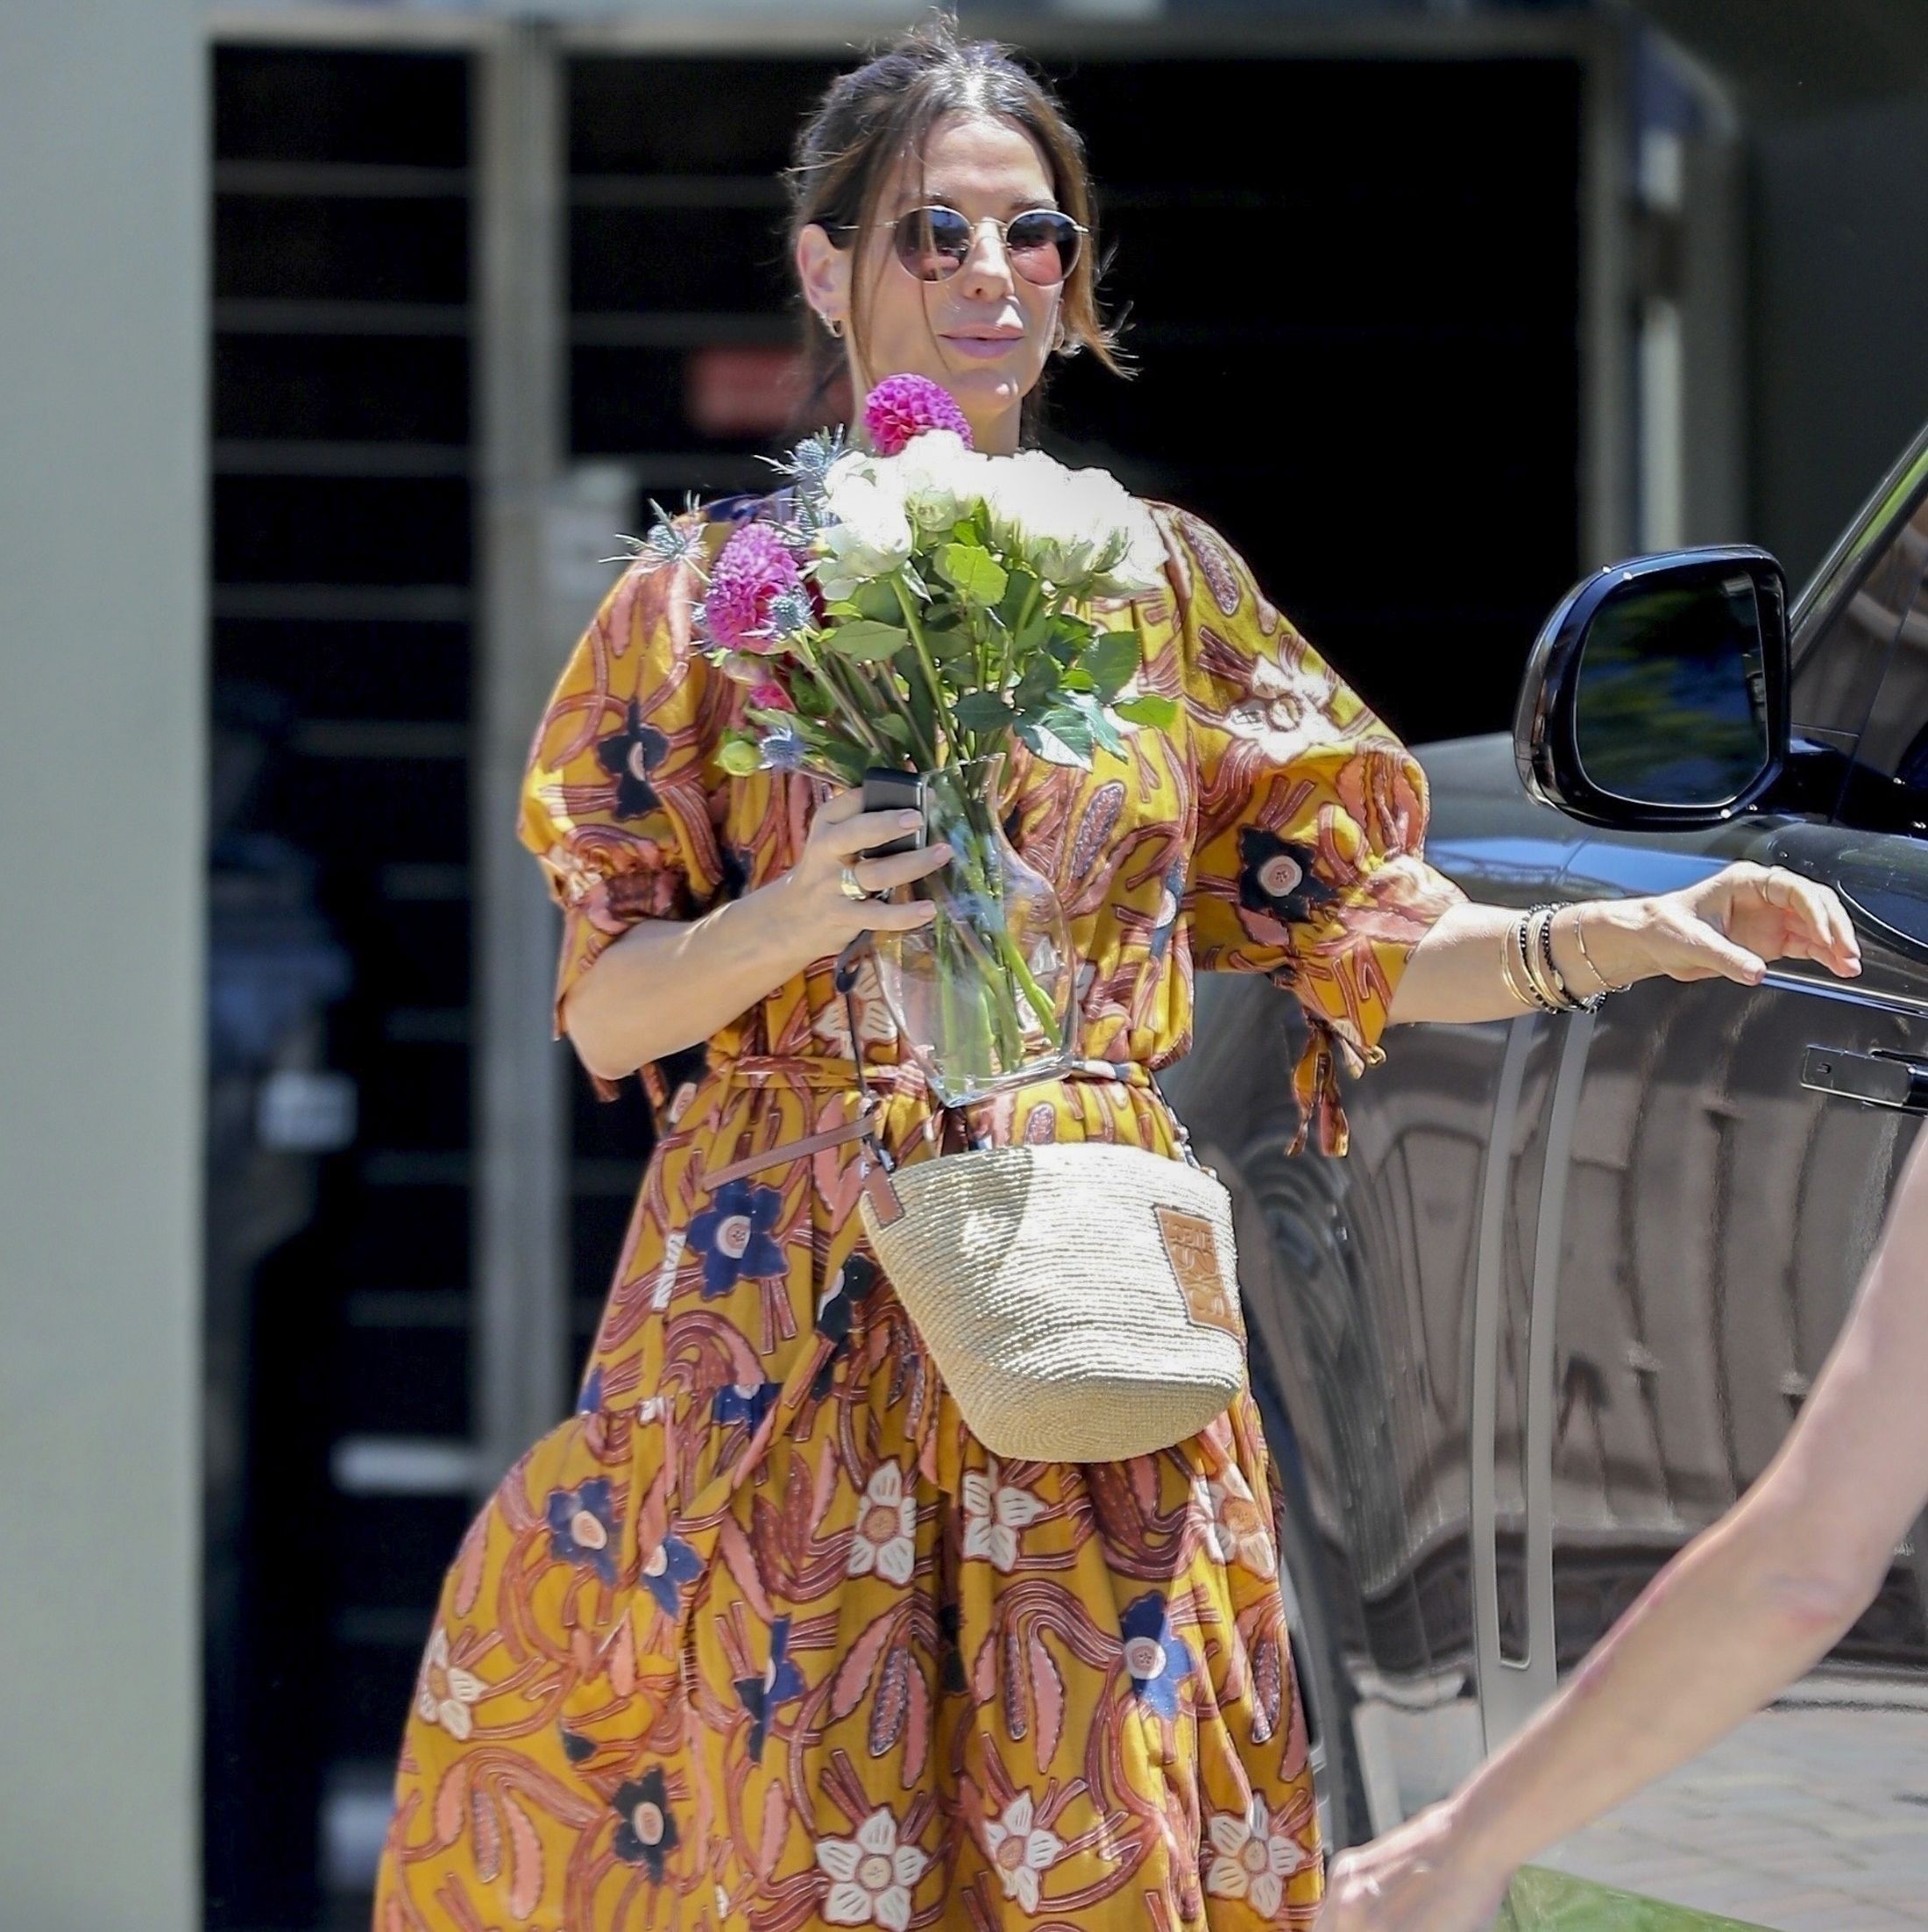 Sandra Bullock Looks So Fabulous in a Floral Dress on Rare L.A. Outing